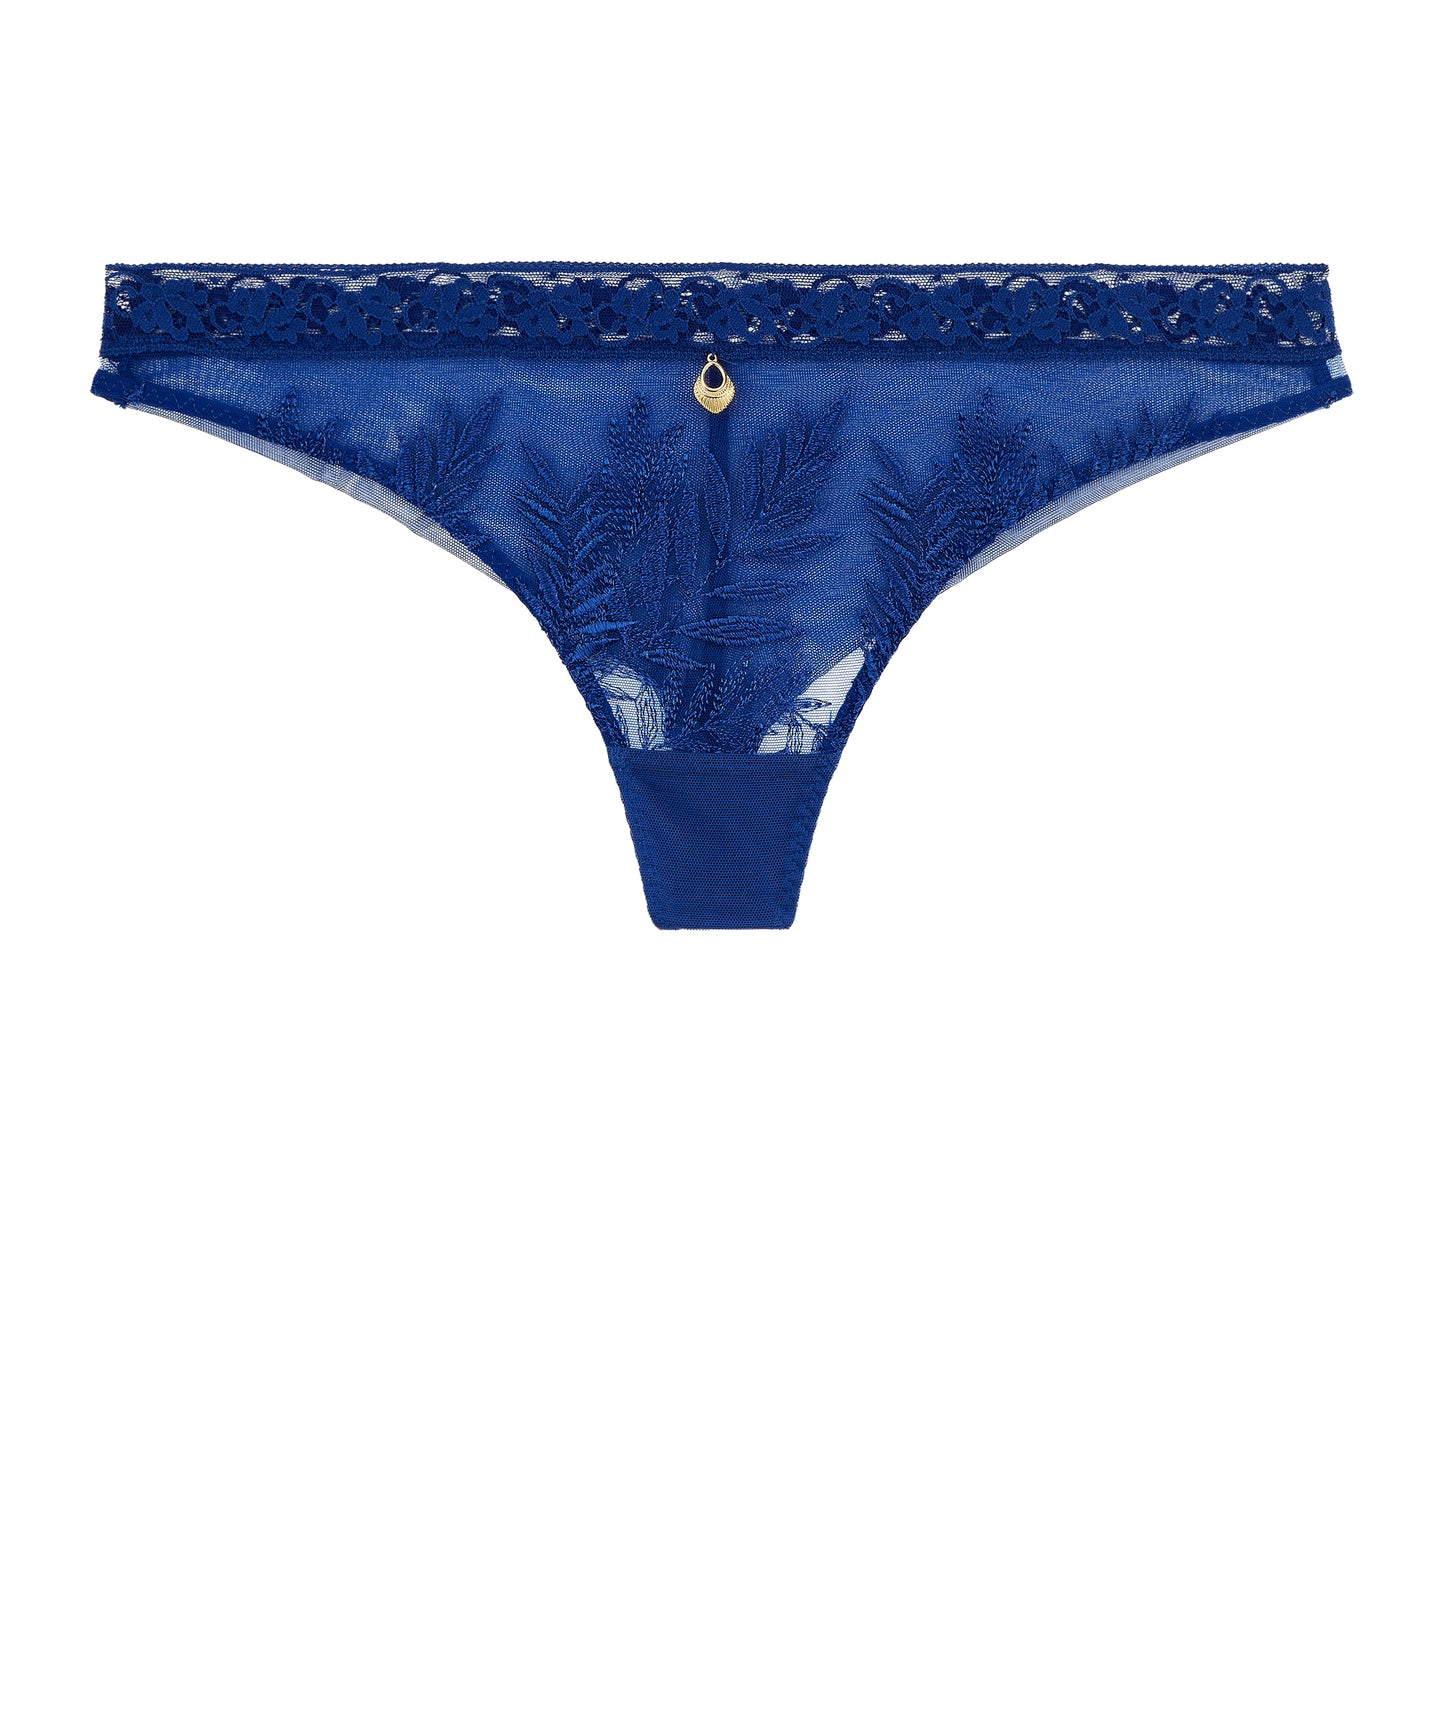 Parenthèse Tropicale Tanga in Electric Blue By Aubade - S-XXL